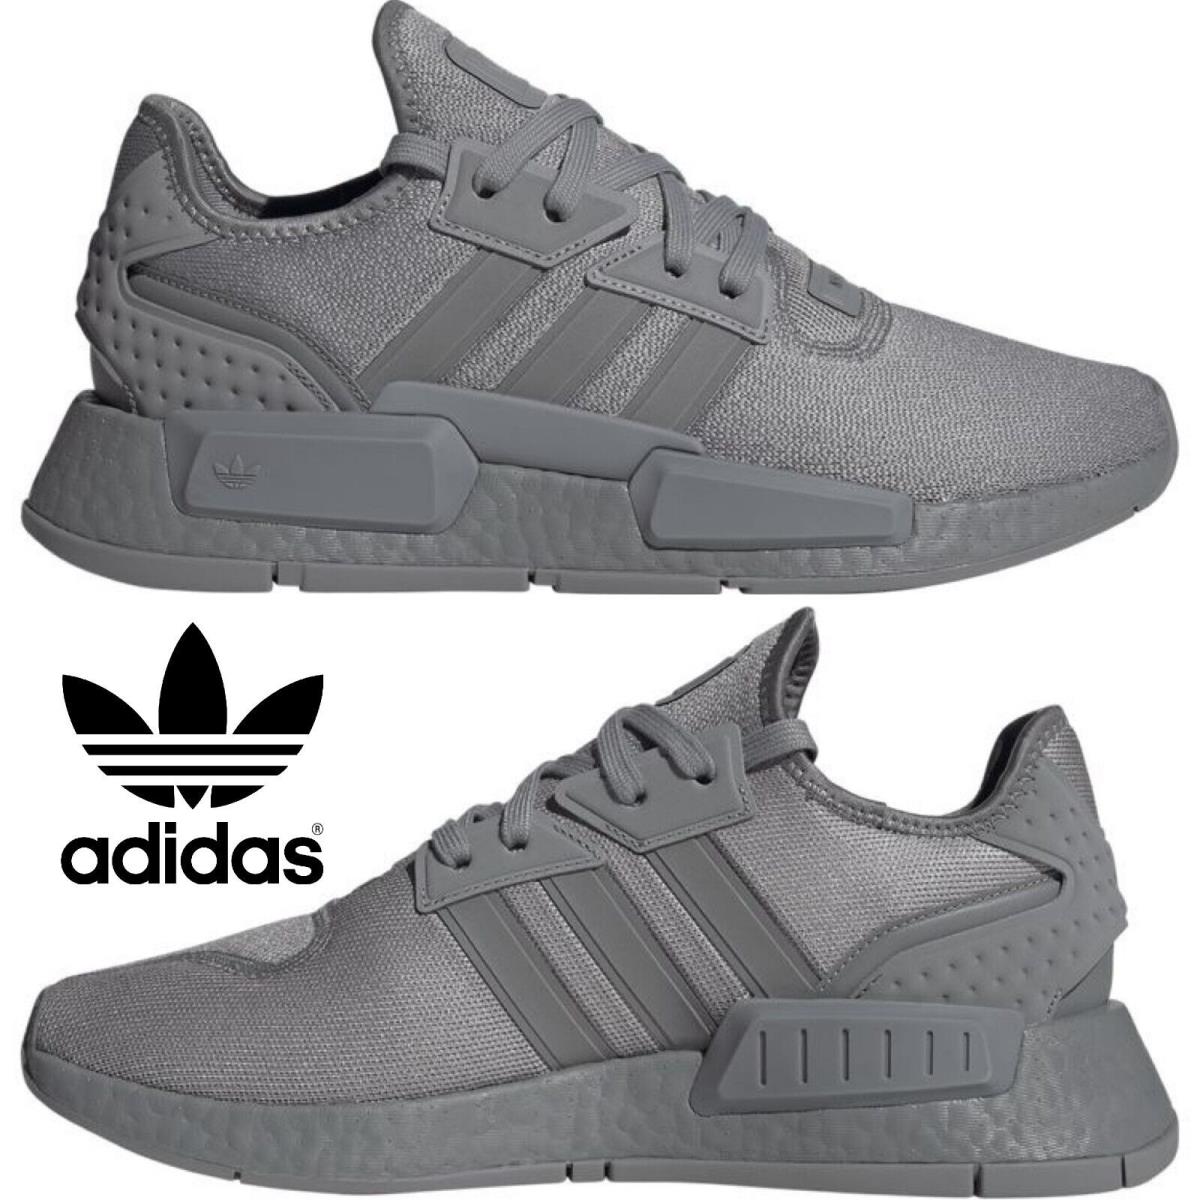 Adidas Originals Nmd G1 Men`s Sneakers Running Shoes Gym Casual Sport Gray - Gray , Grey/Grey Manufacturer